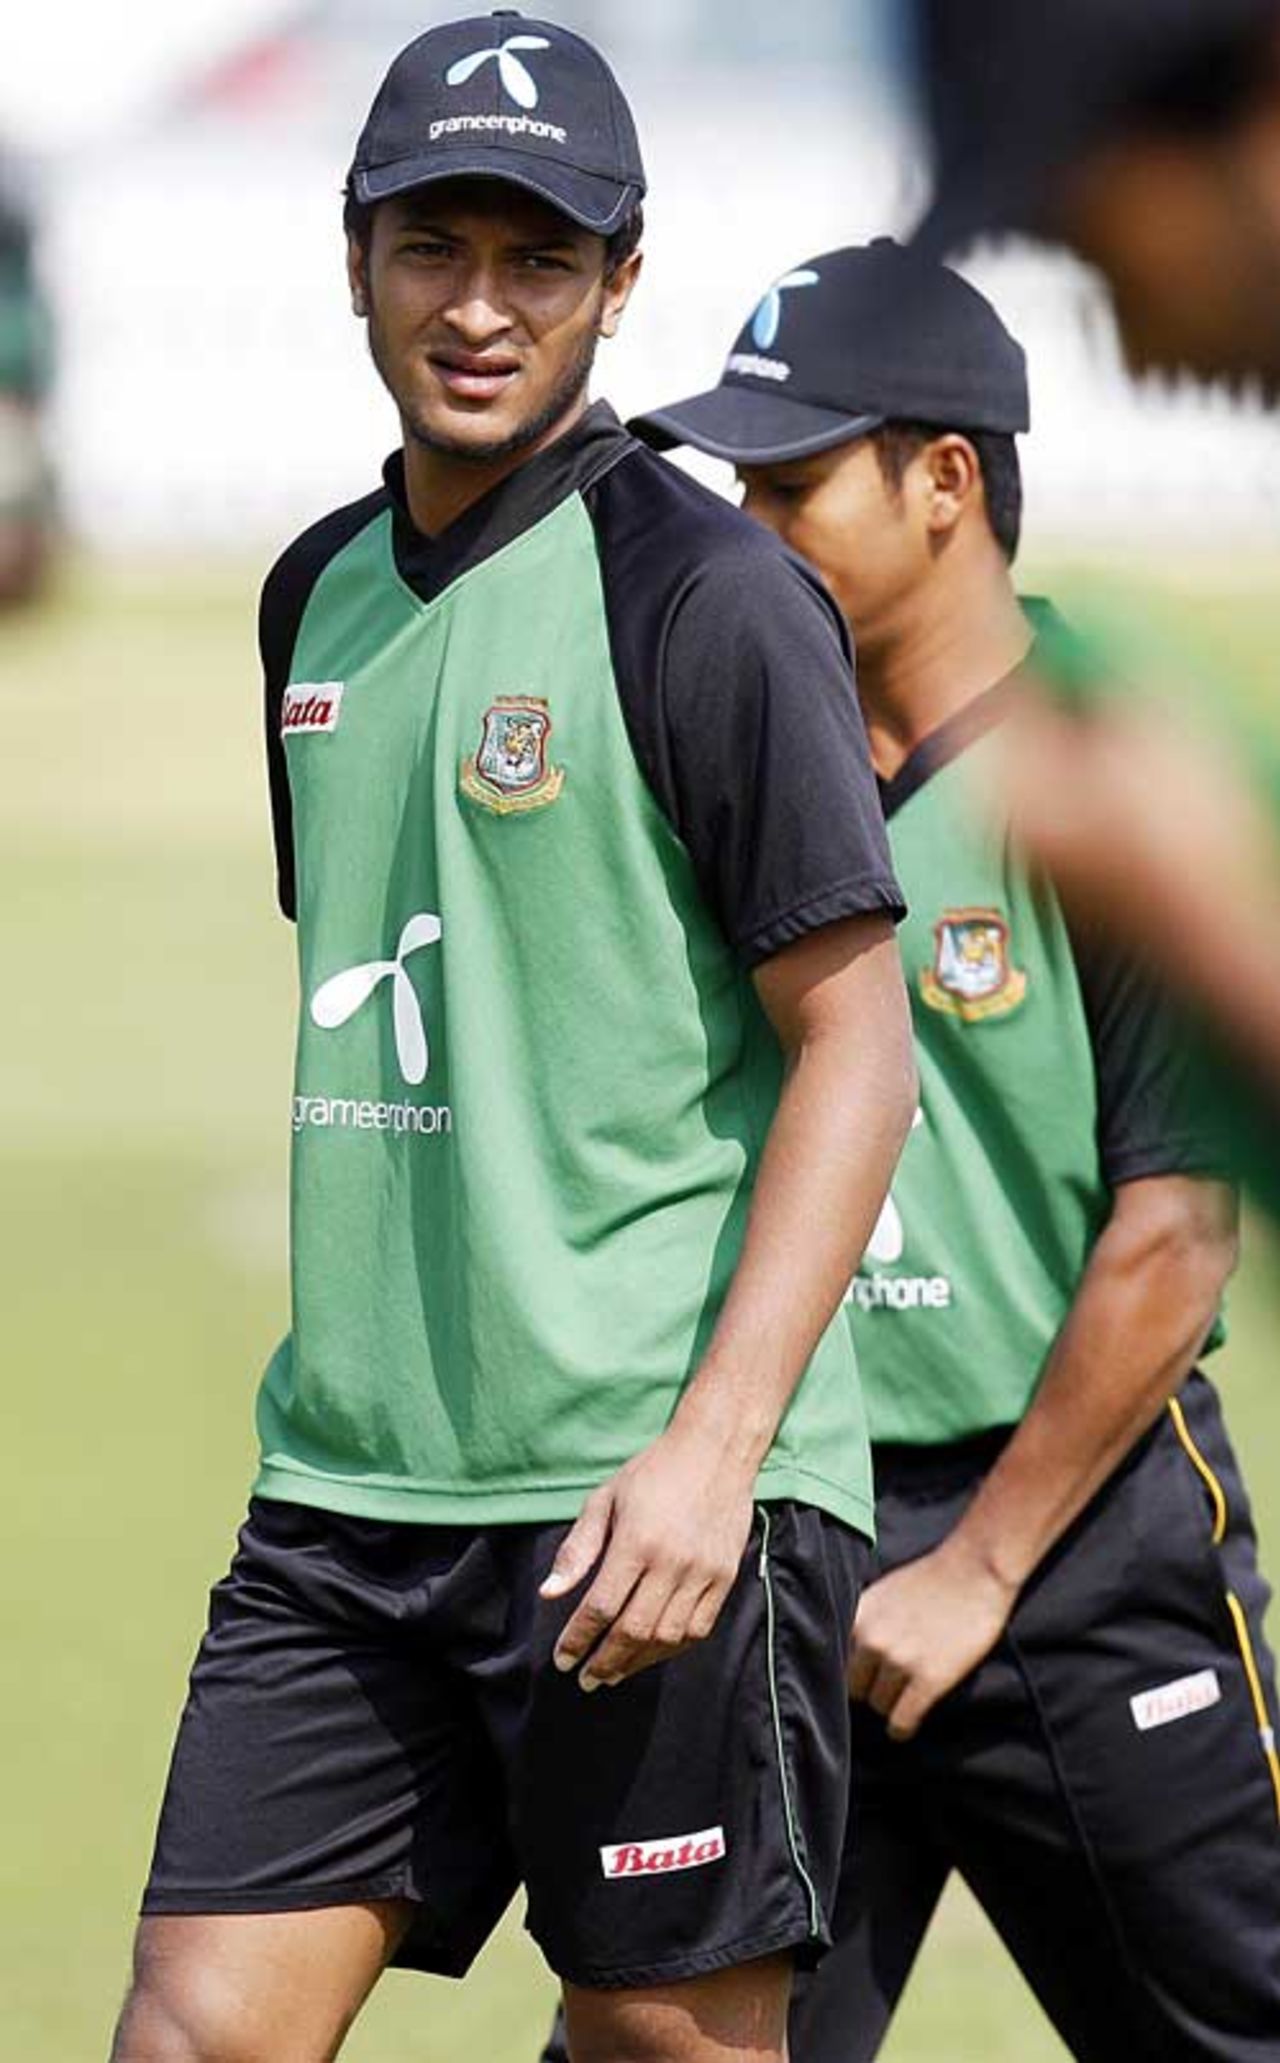 Bangladesh captain Shakib Al Hasan has recovered from chicken pox, ponders his options during training, Lord's, May 25, 2010